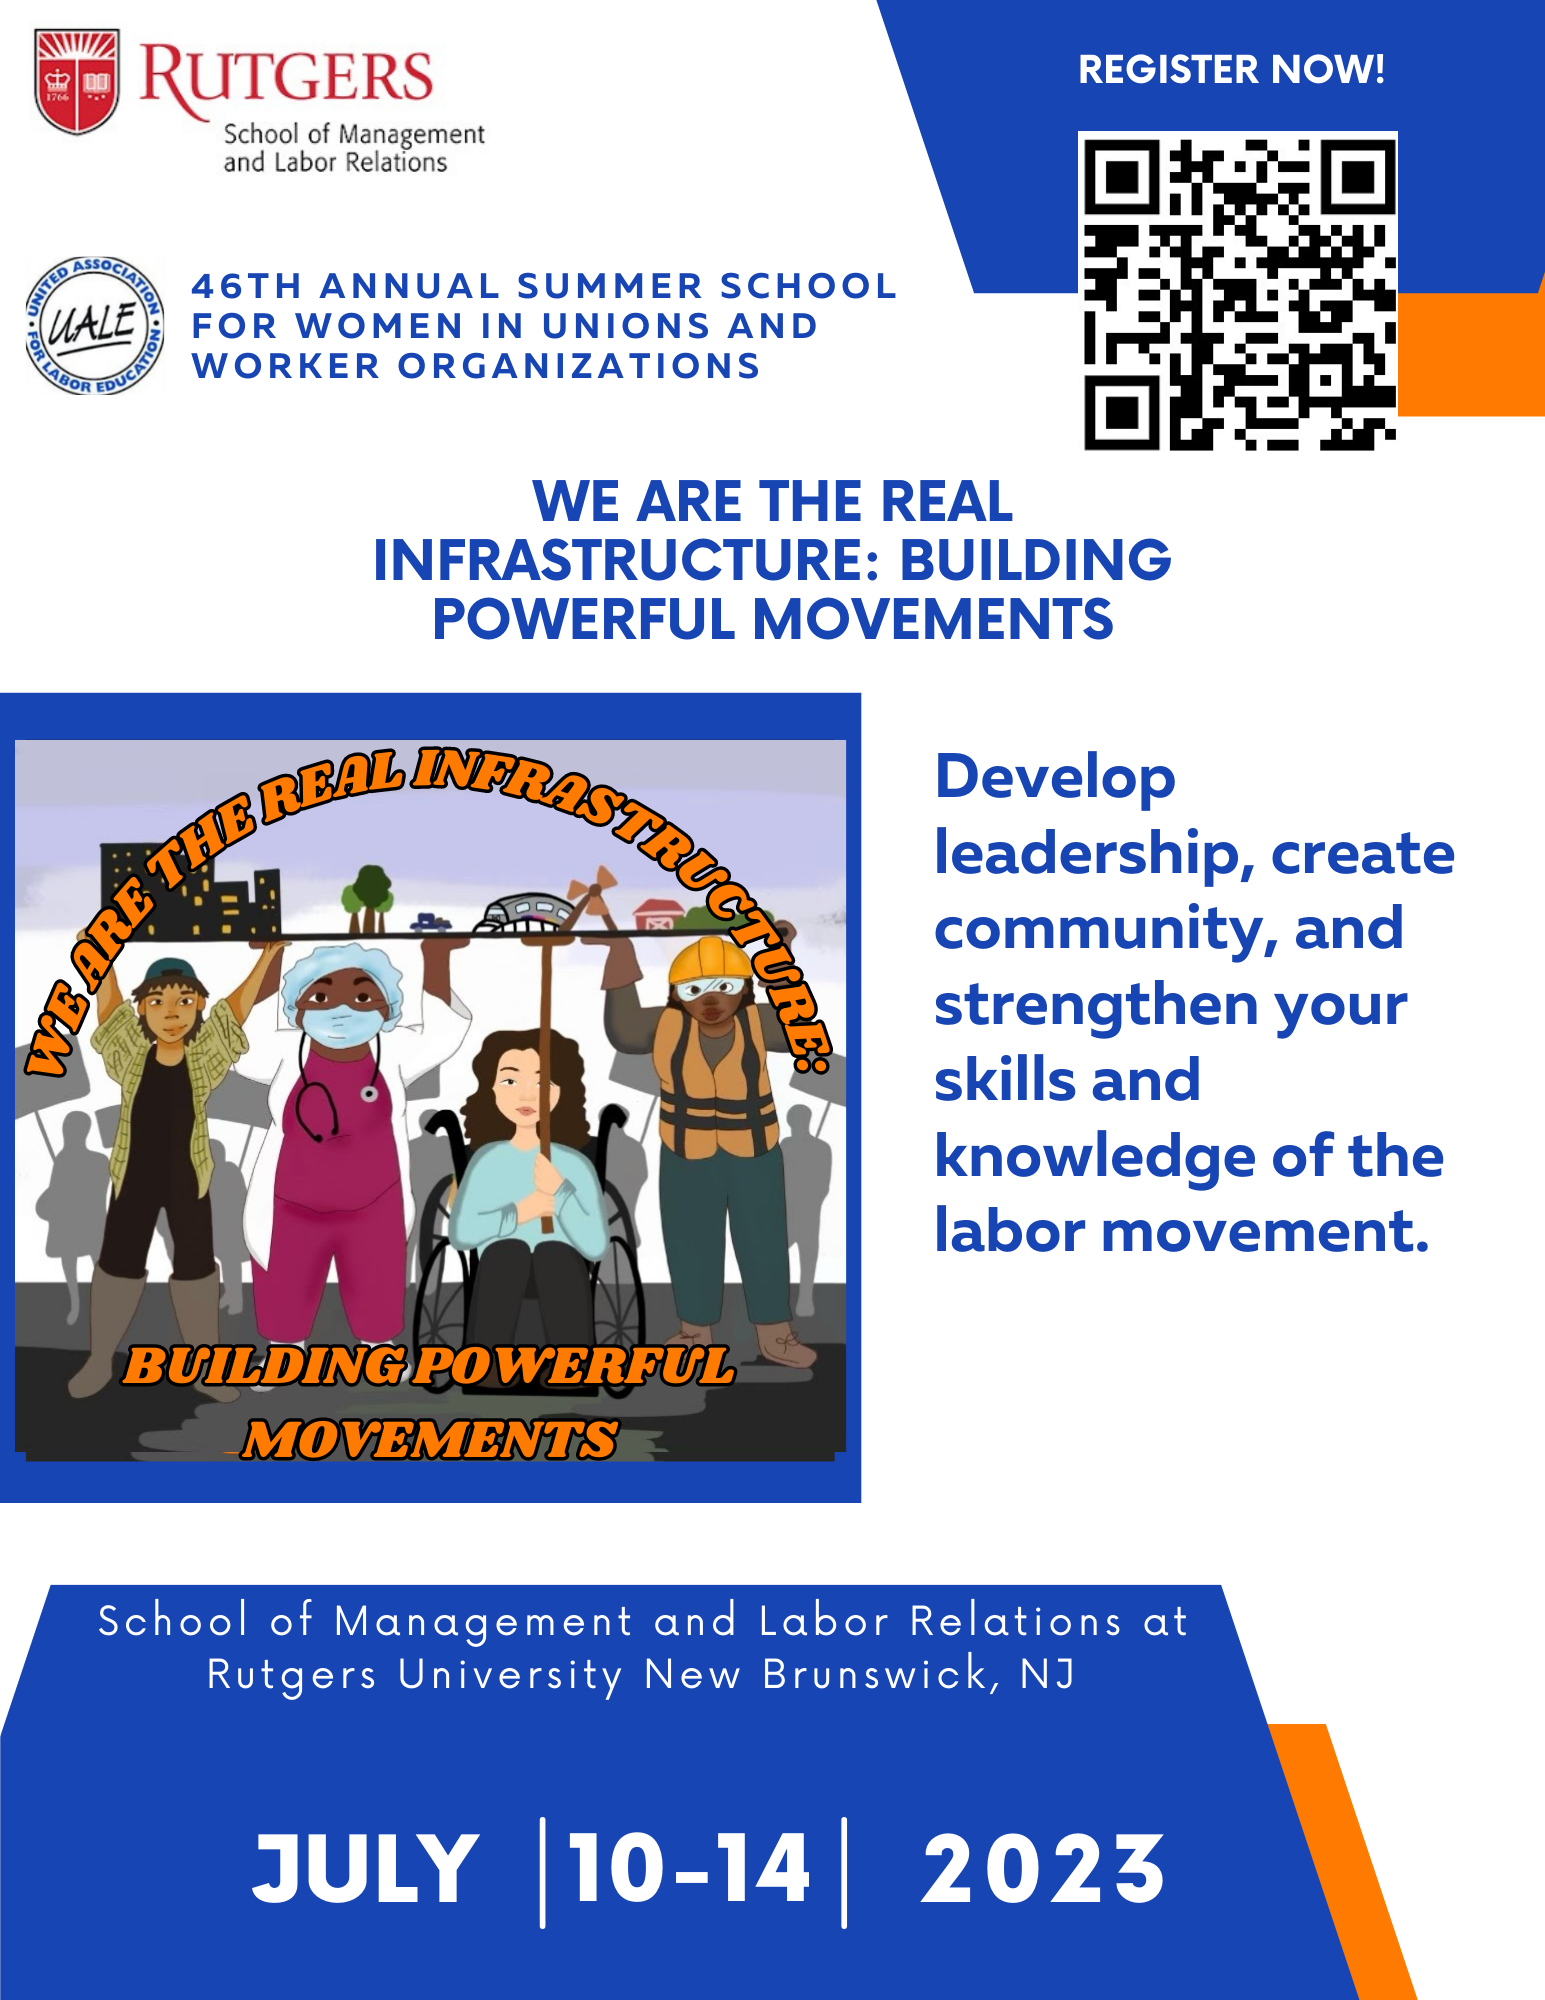 Image of Save the Date for Women's Summer School